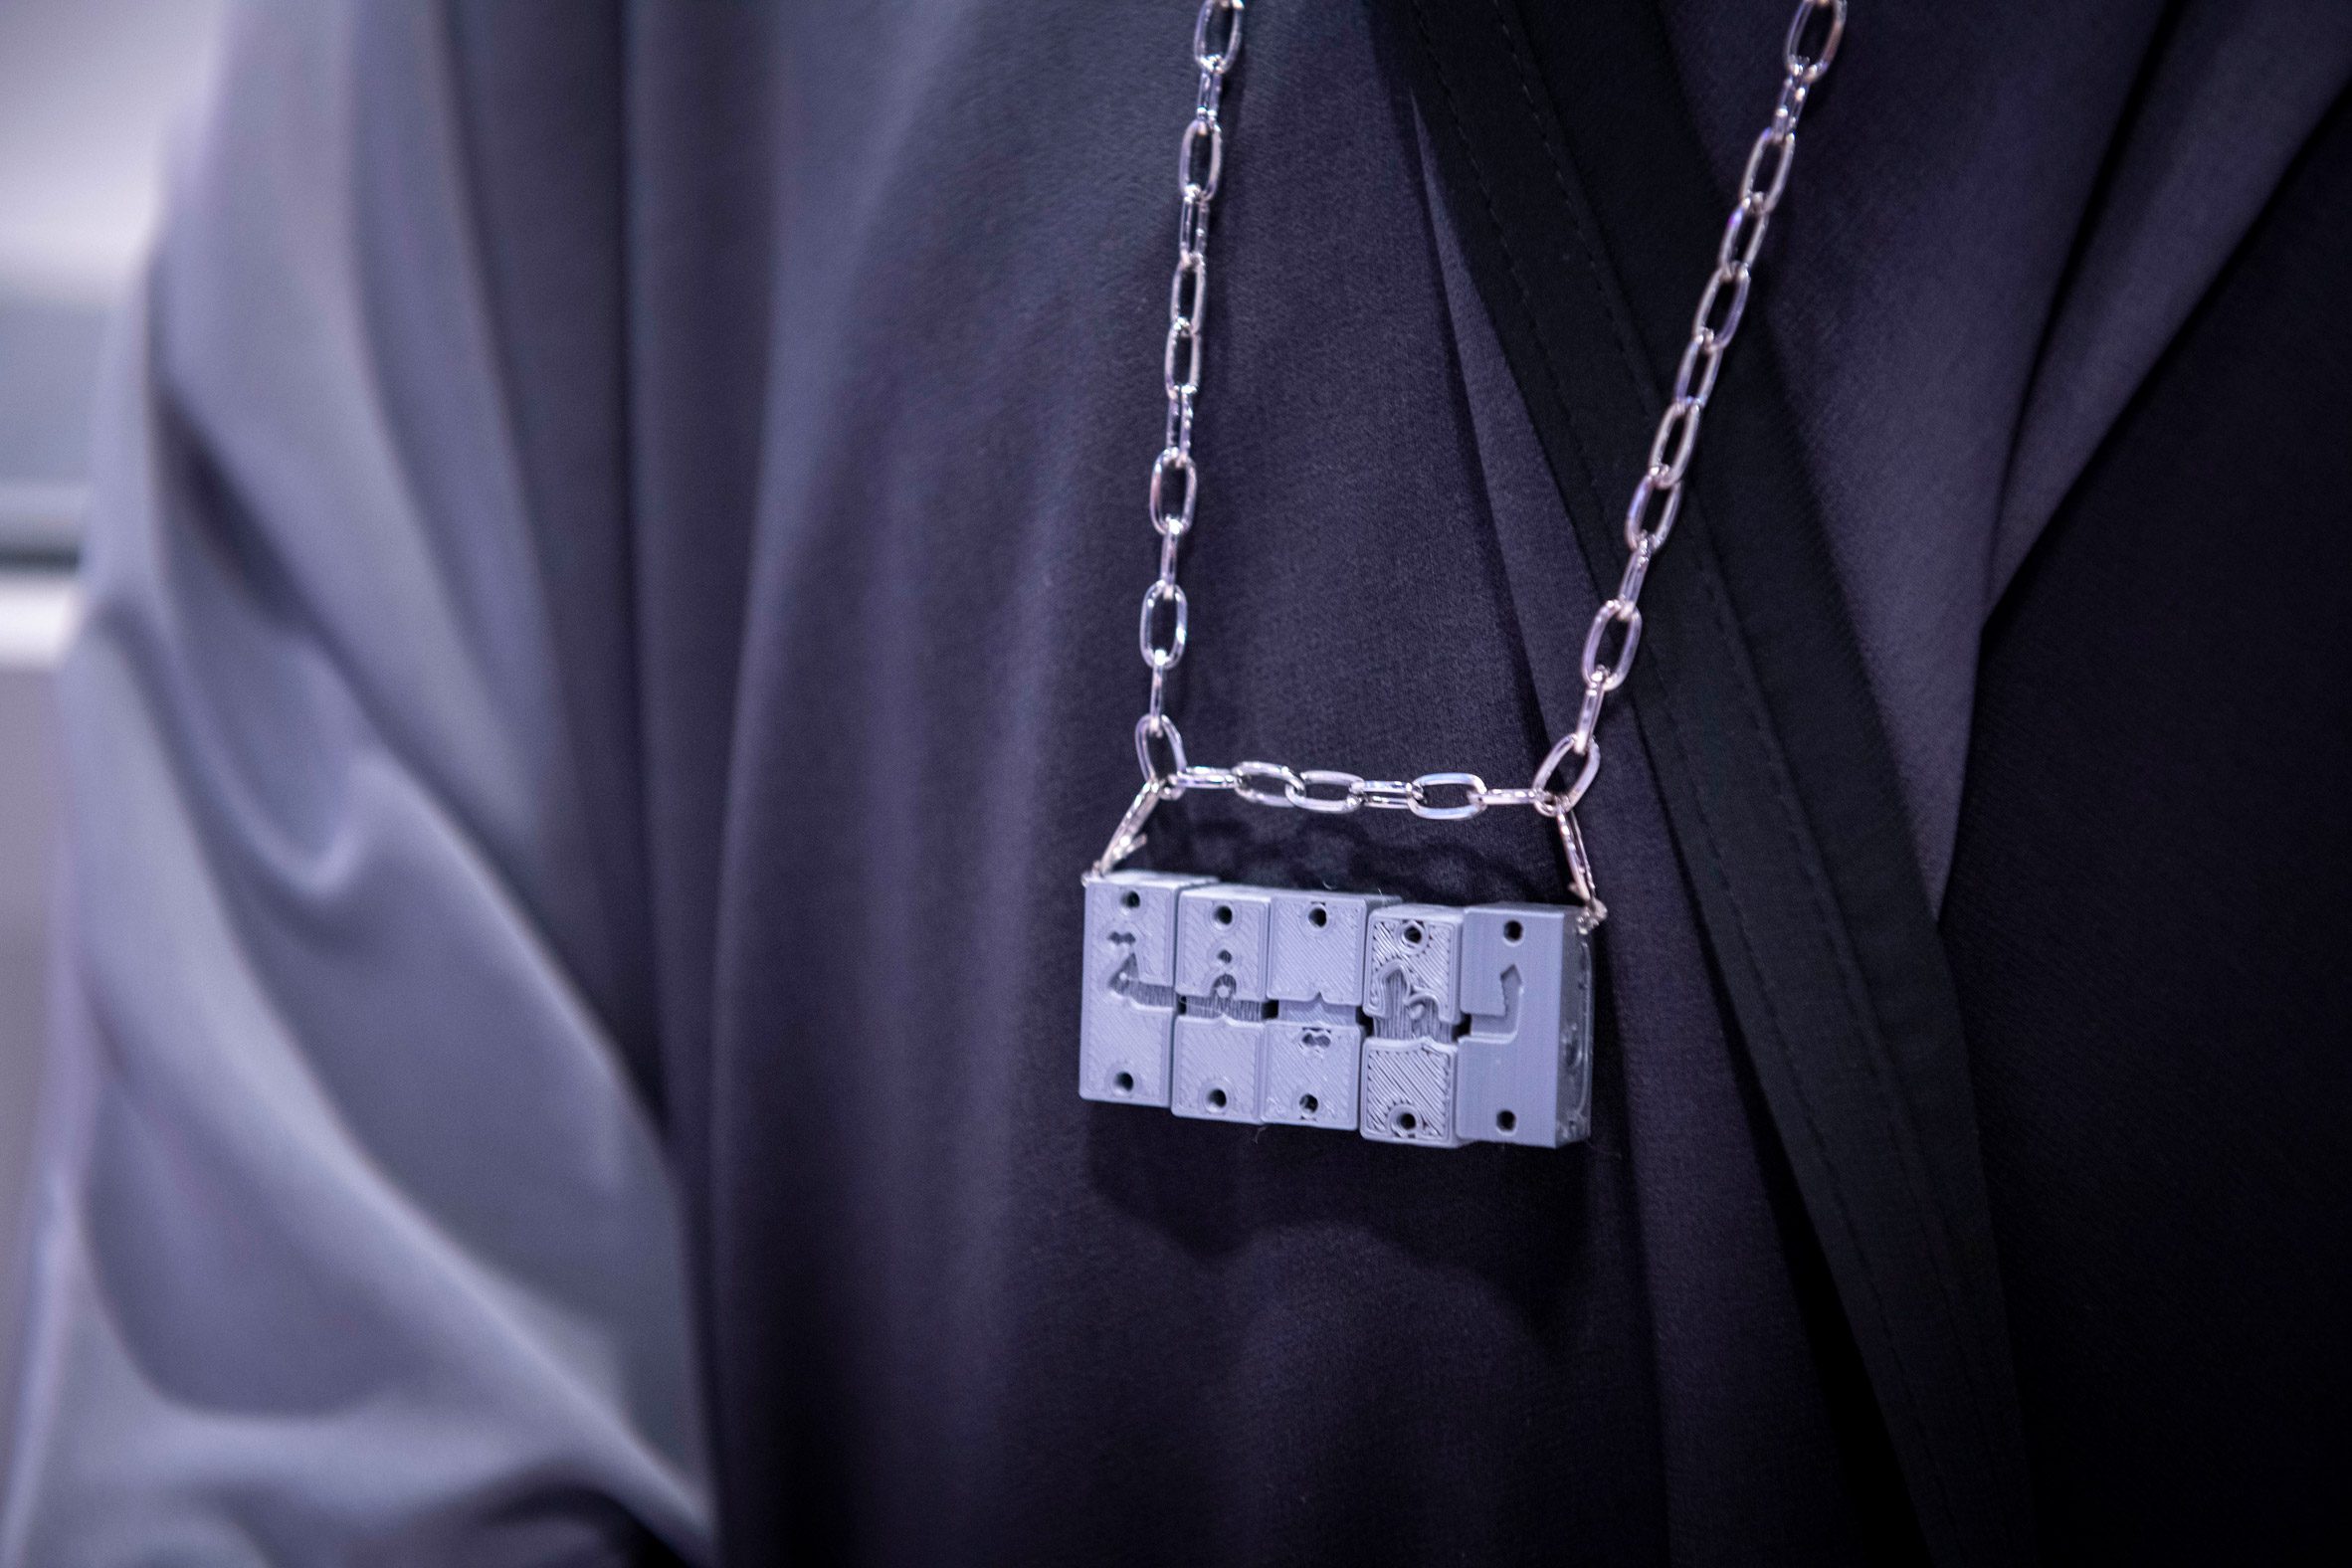 Five small engraved cubes on a silver chain worn by a person in black clothing